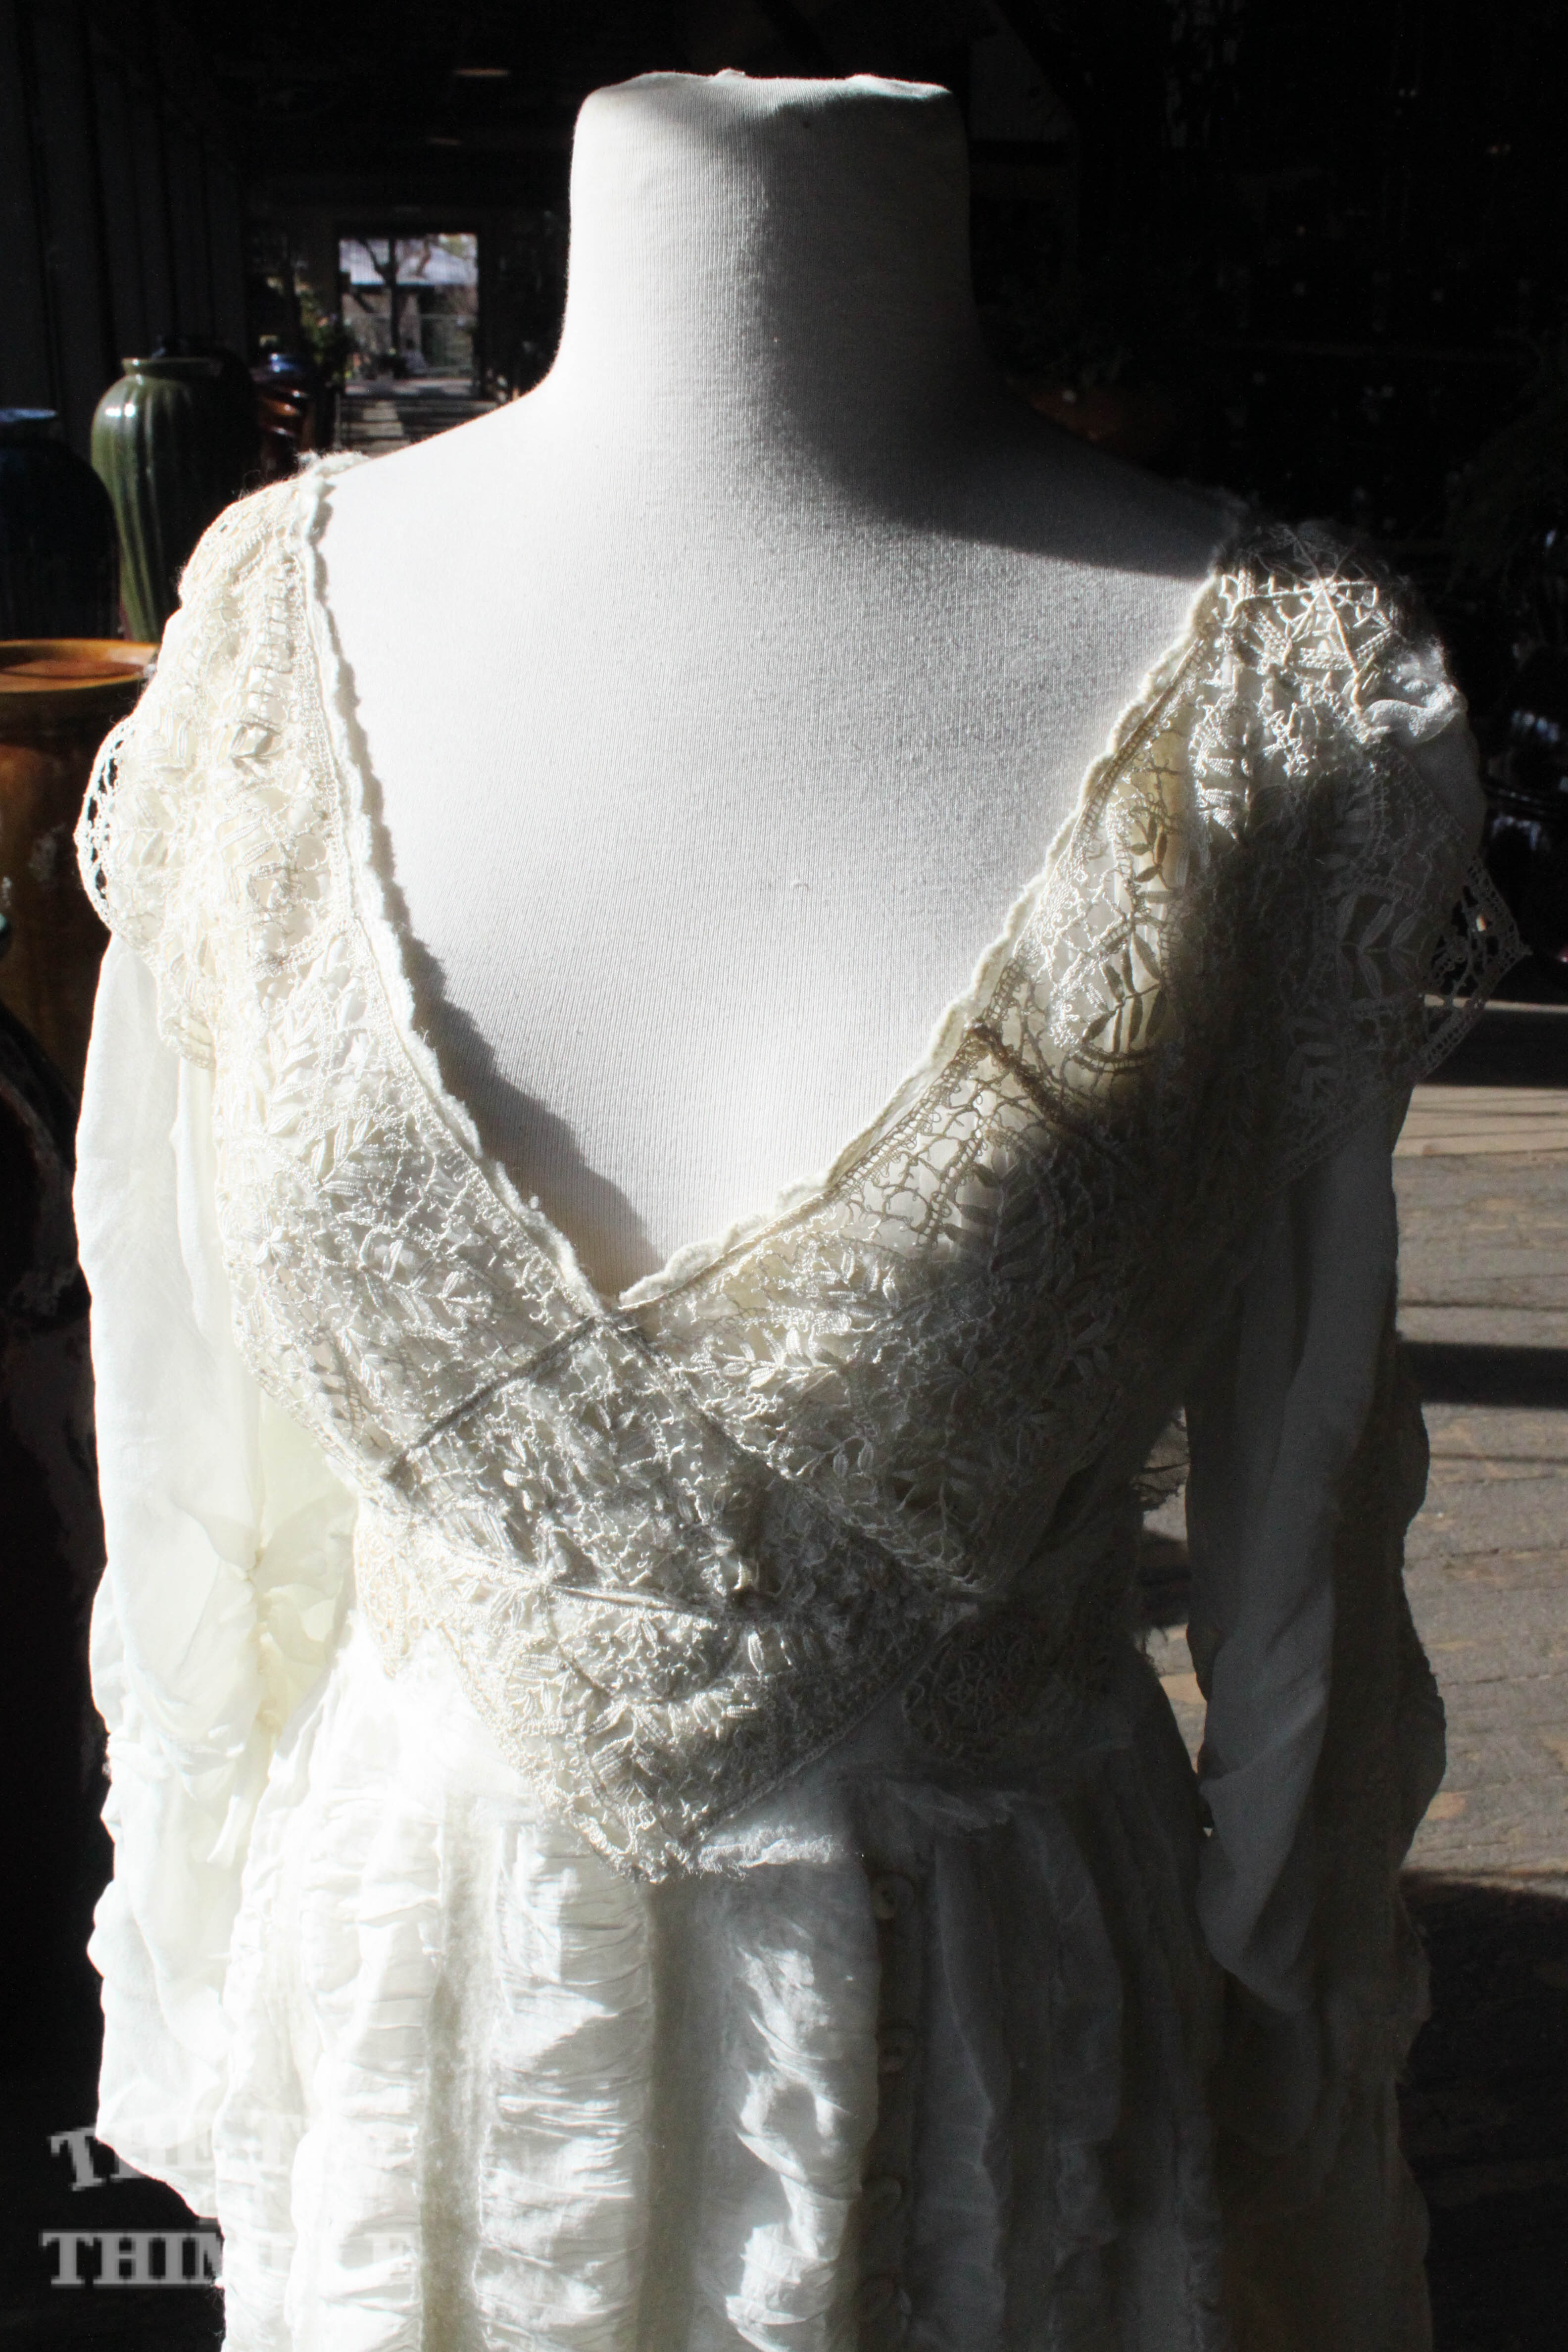 Felted Wedding Dress by Sharon Mansfield at The Tin Thimble